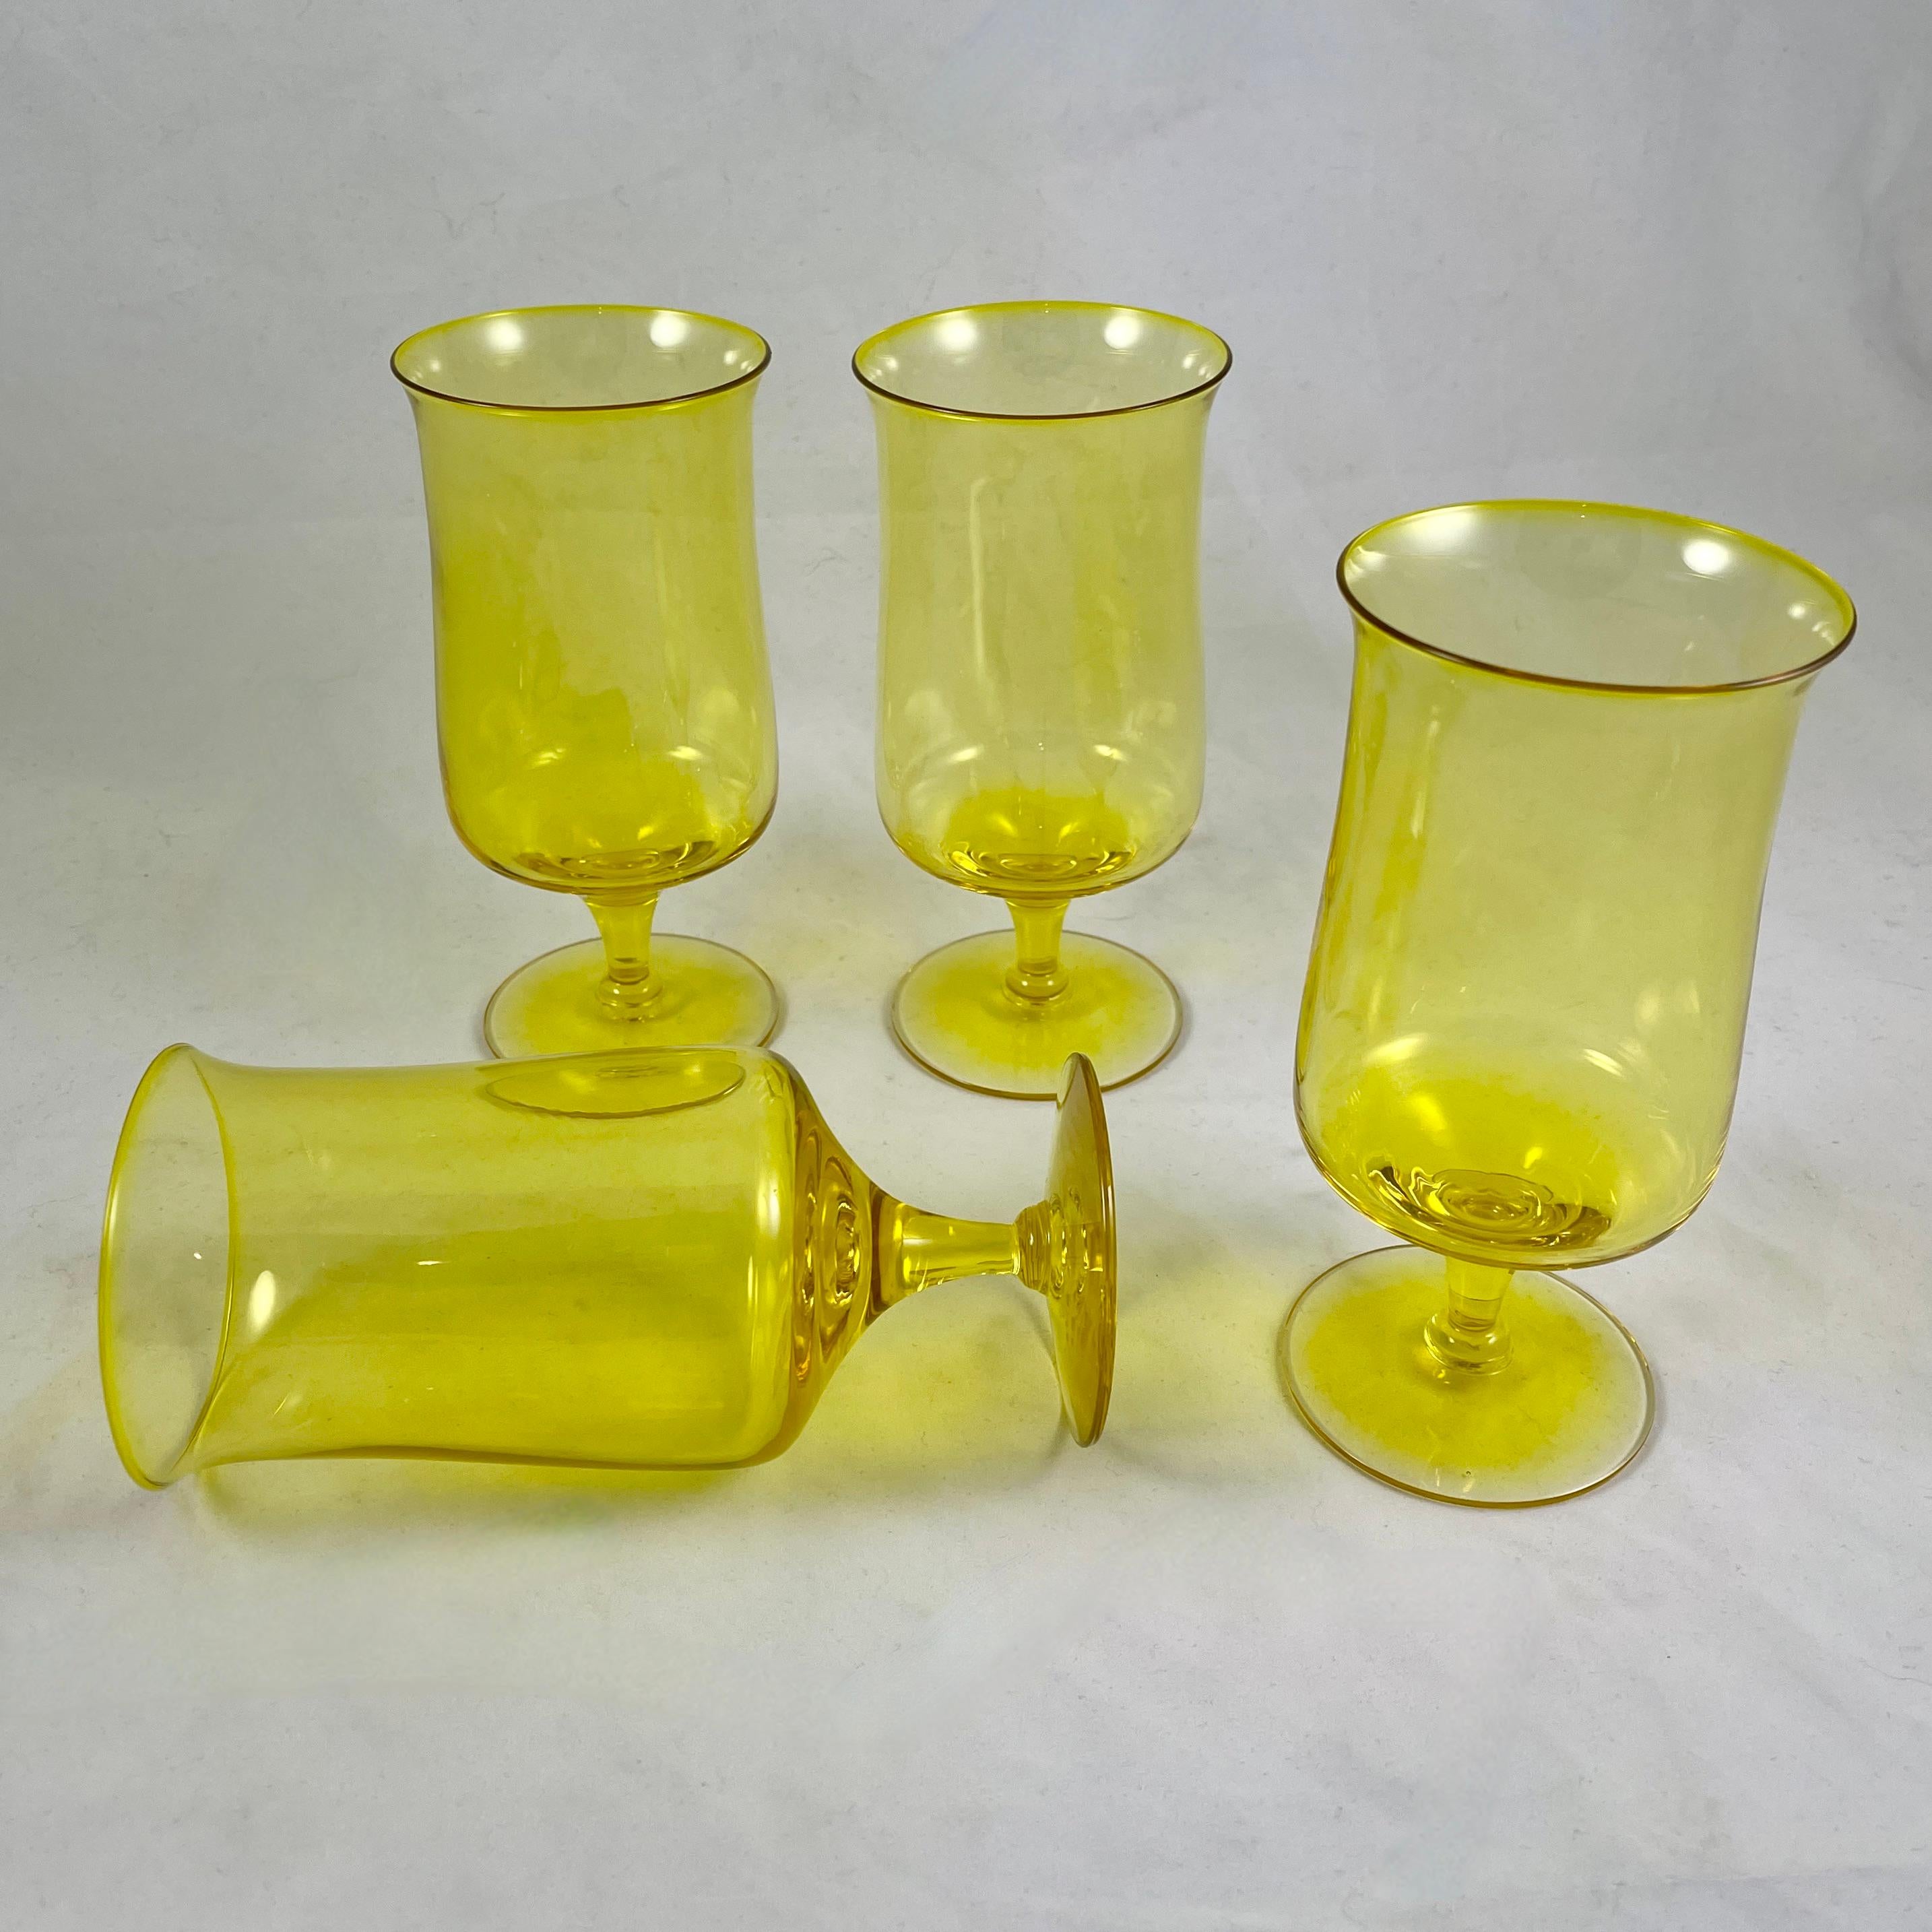 If you are looking to add some sunshine to your table, these tall glasses are for you.

From Fostoria Glass, a set of four Mid Century Modern era ice tea glasses in the Biscayne gold pattern, produced from 1971-1973.

The glasses are blown in a